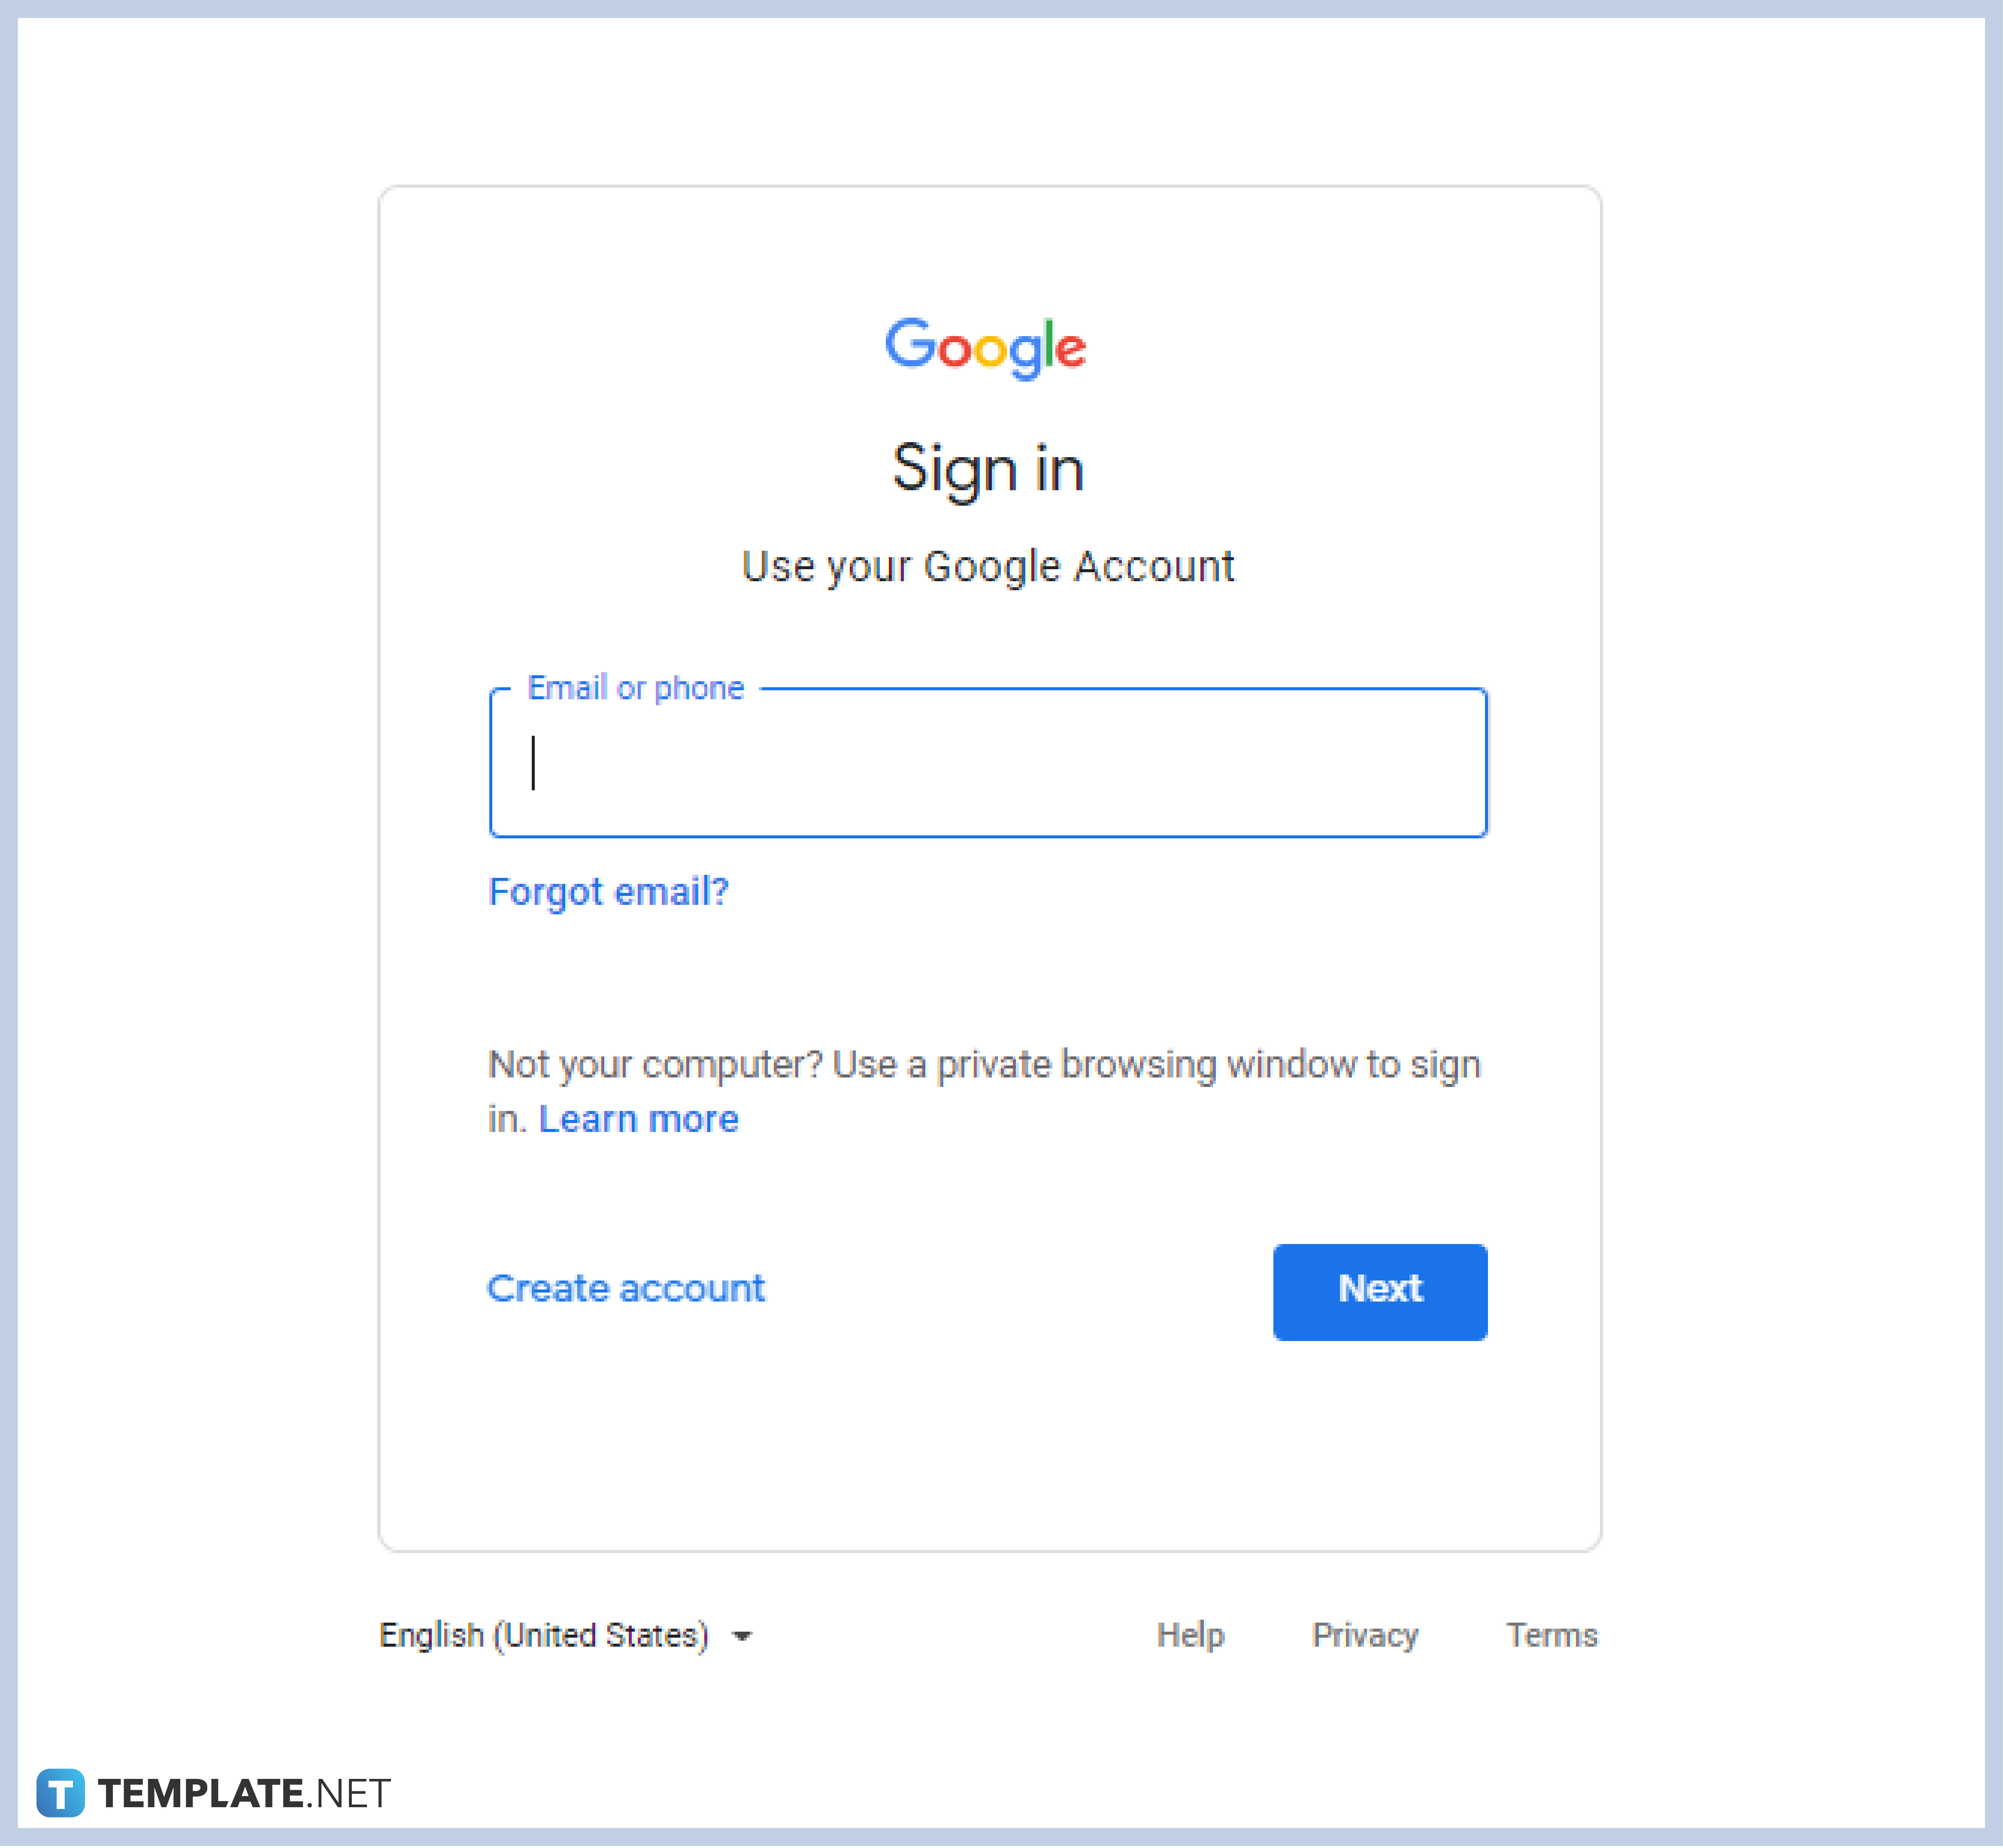 step-1-log-in-to-your-google-account-011